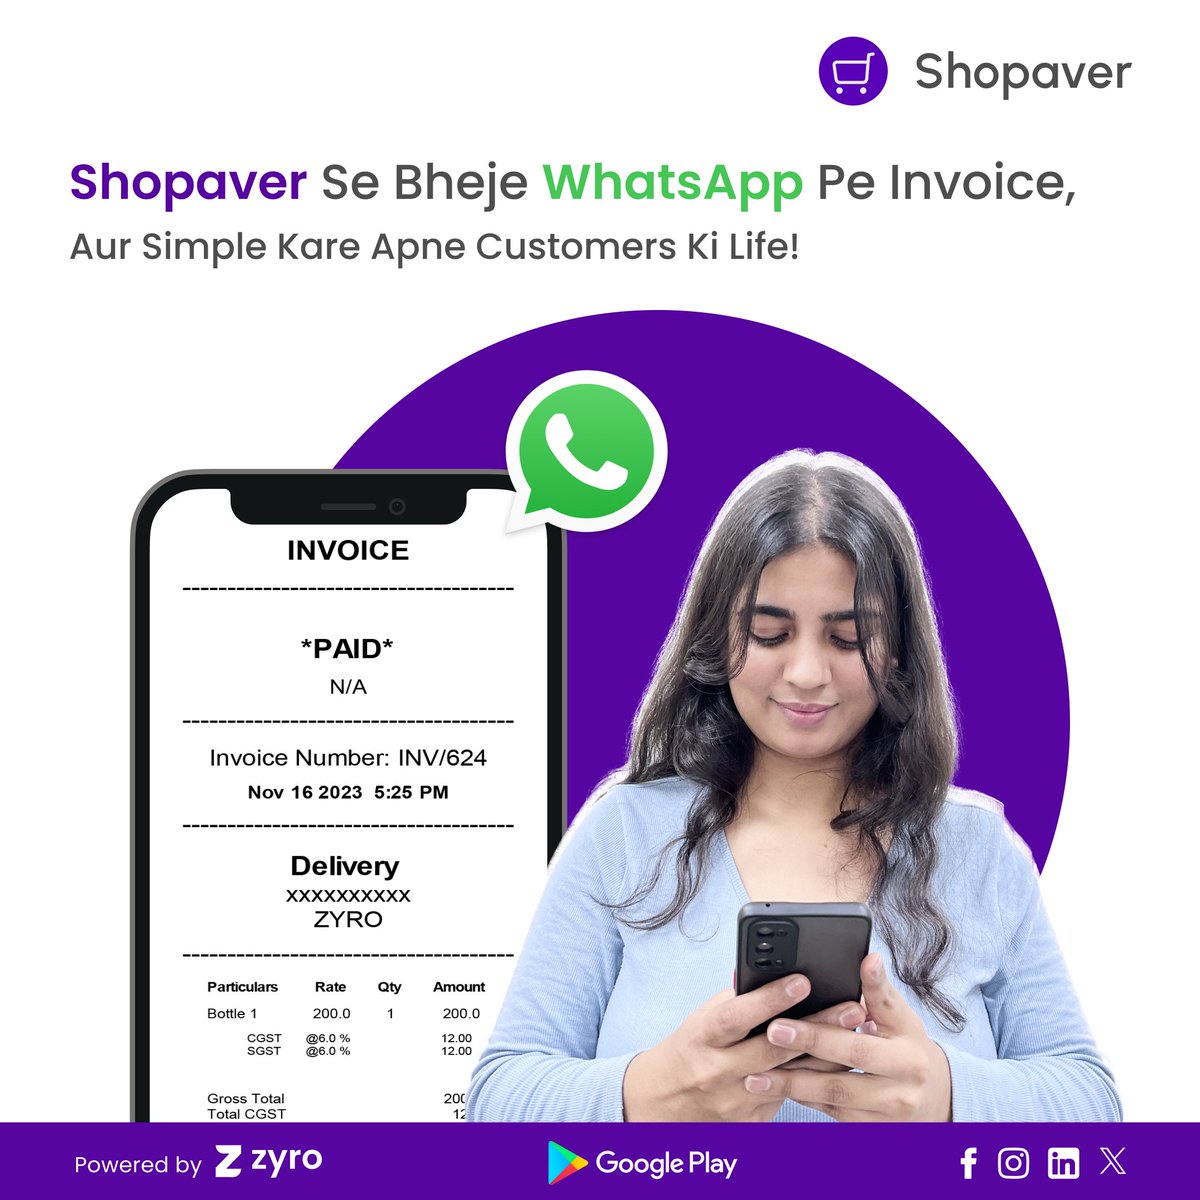 Experience a new era in invoicing with Shopaver's WhatsApp Commerce! Send stylish invoices effortlessly via WhatsApp for a seamless billing process.

#Shopaver #WhatsAppCommerce #DigitalInvoicing #BusinessOnWhatsApp #Trending #OnlineShopping